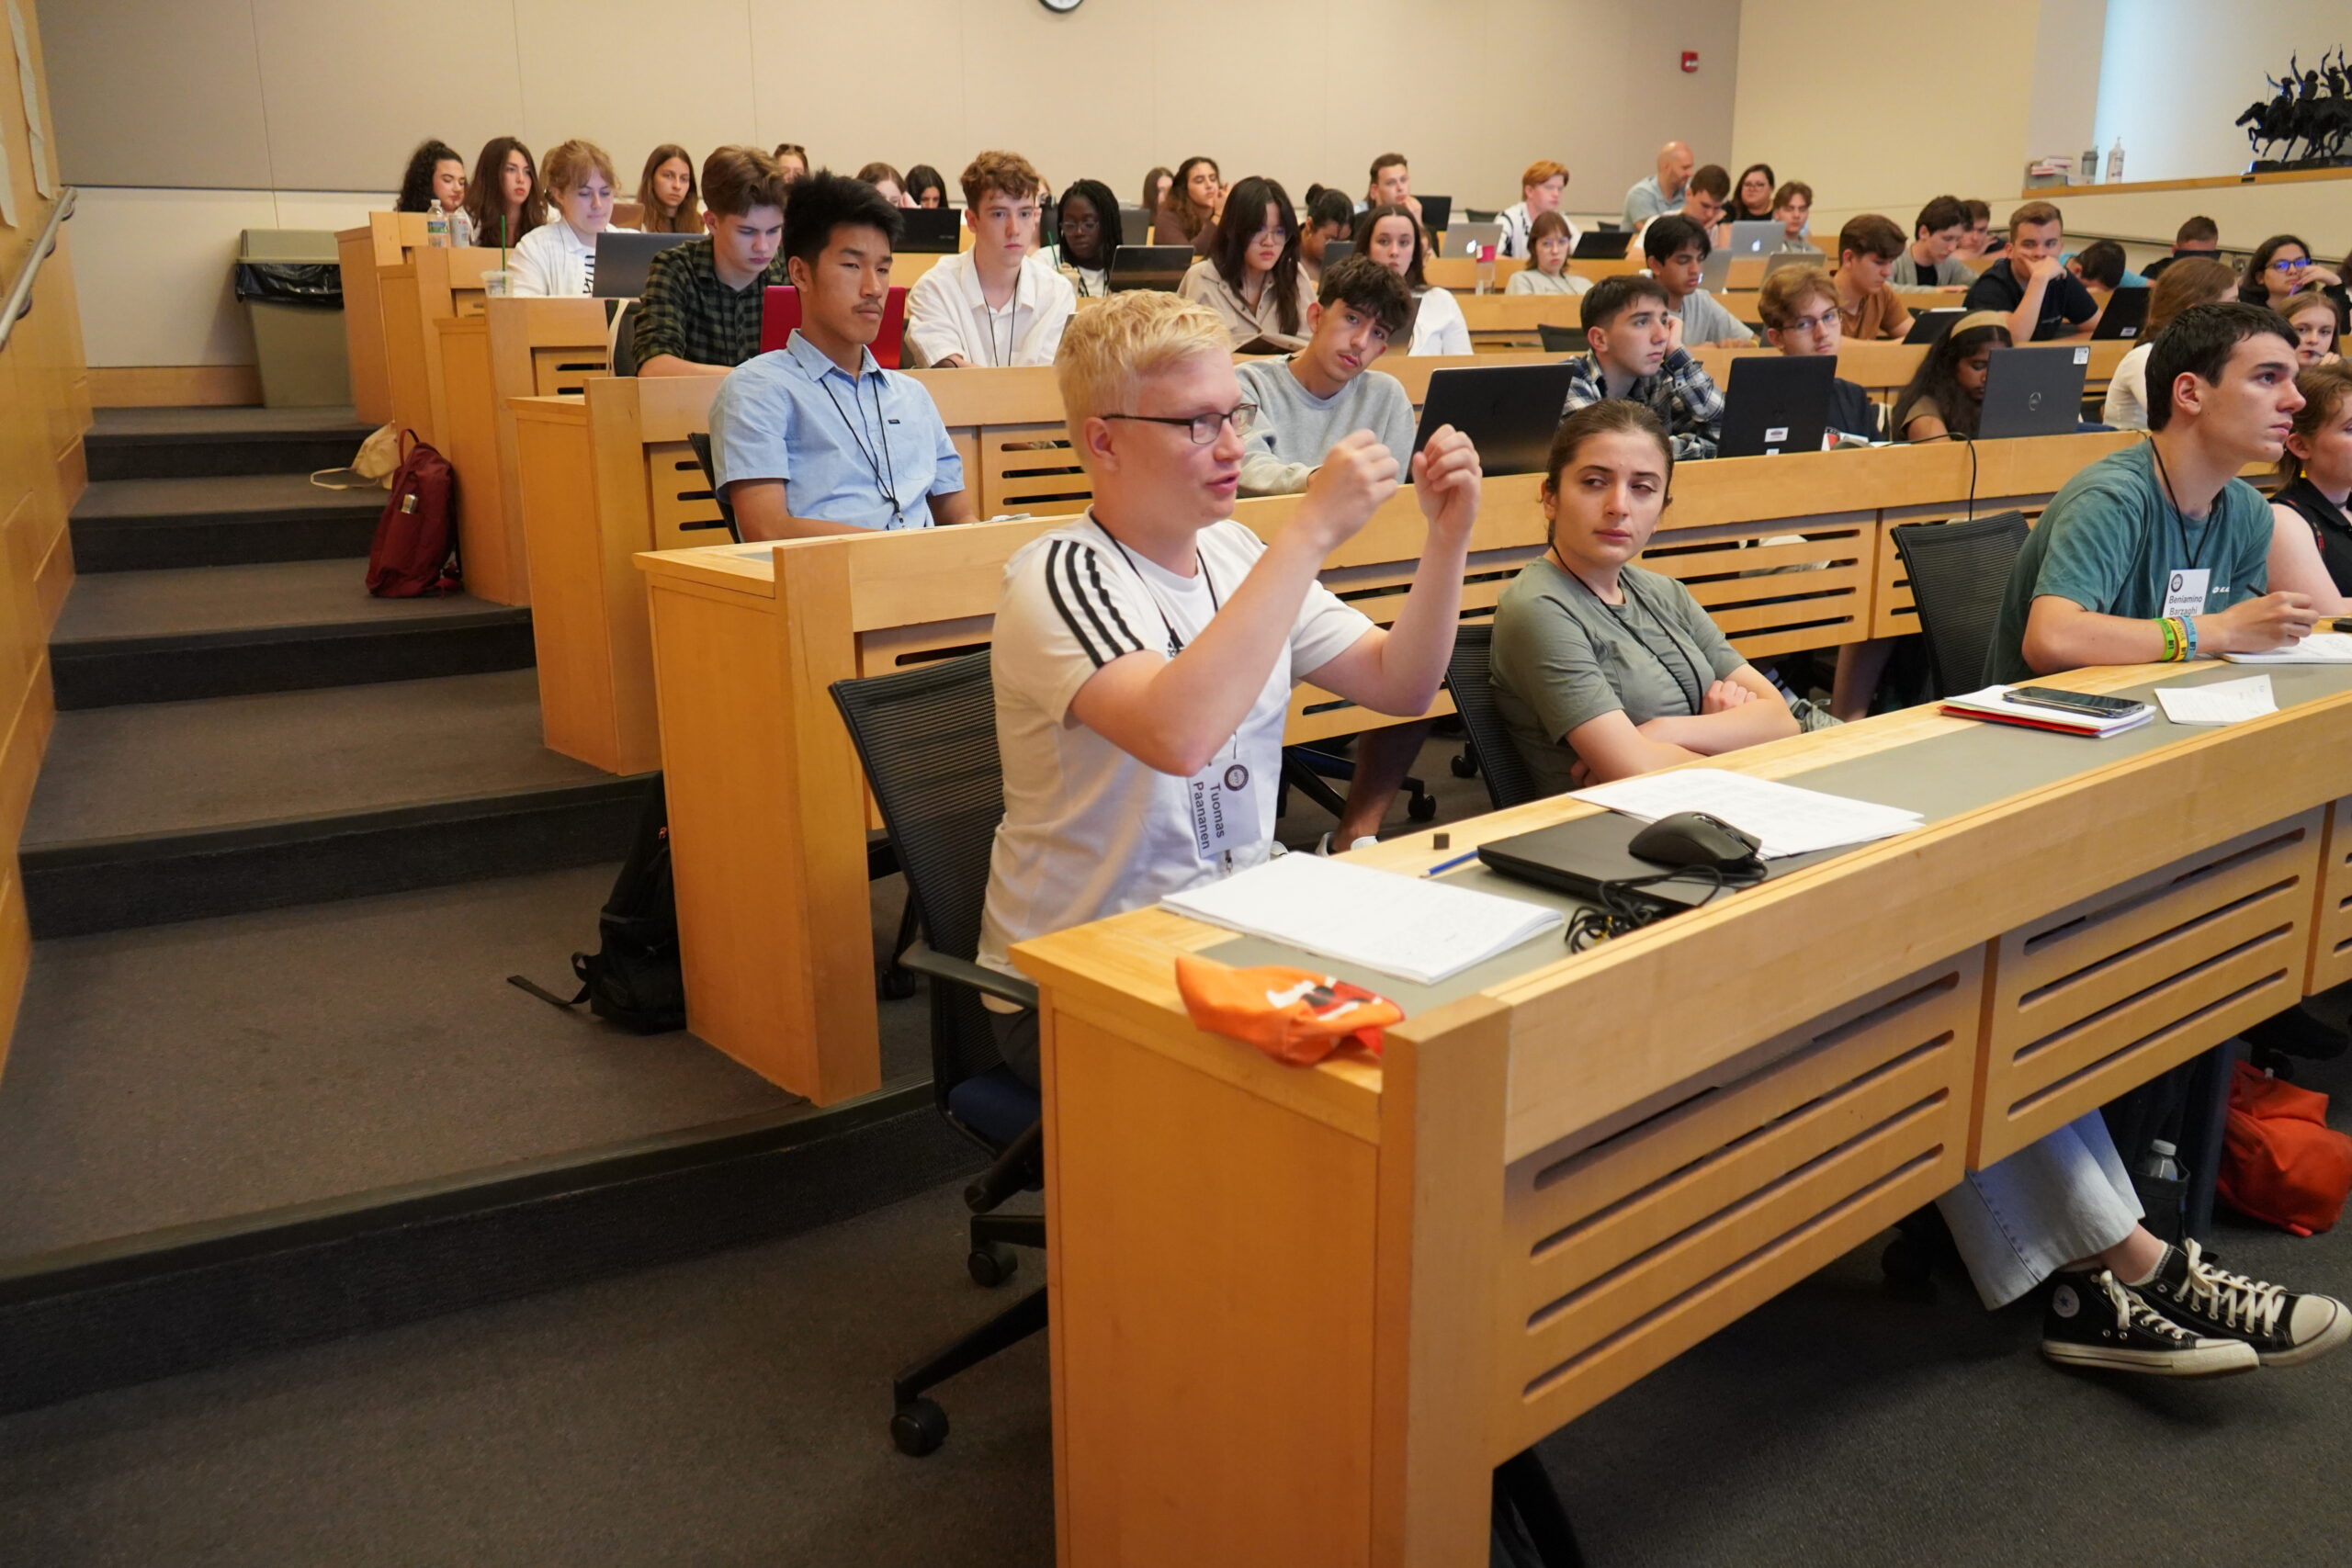 A group of students seated in a small lecture hall.